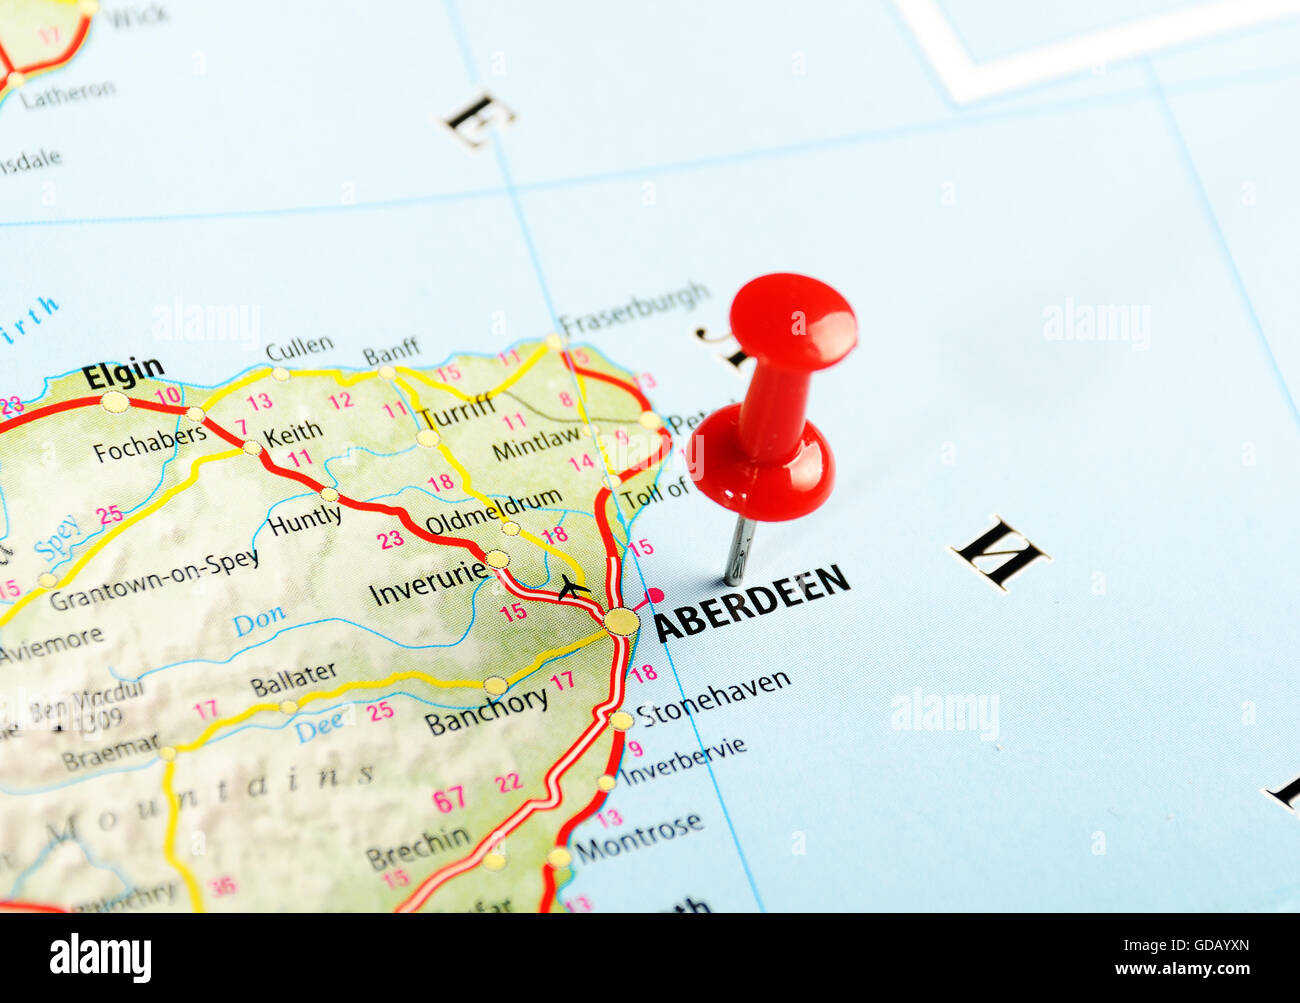 Aberdeen  Scotland  ,United Kingdom  map  and  pin - Travel concept Stock Photo